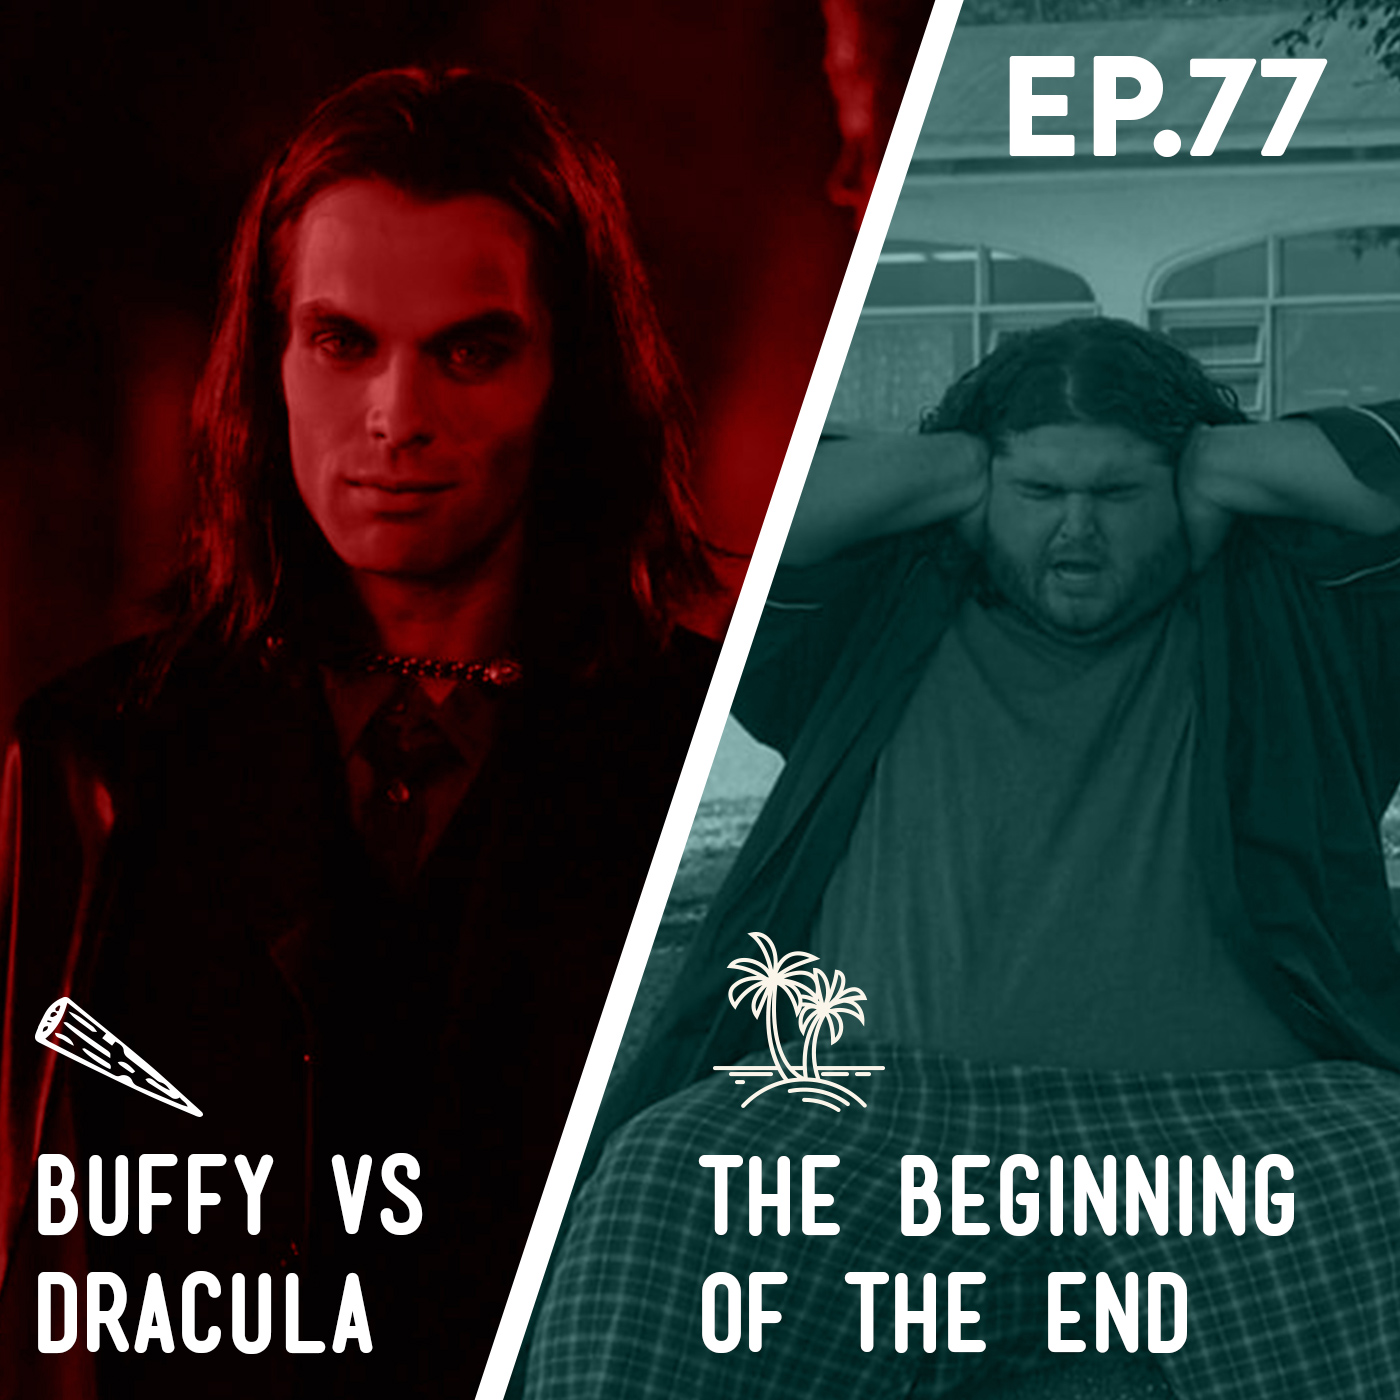 77 - Buffy Vs Dracula / The Beginning of the End